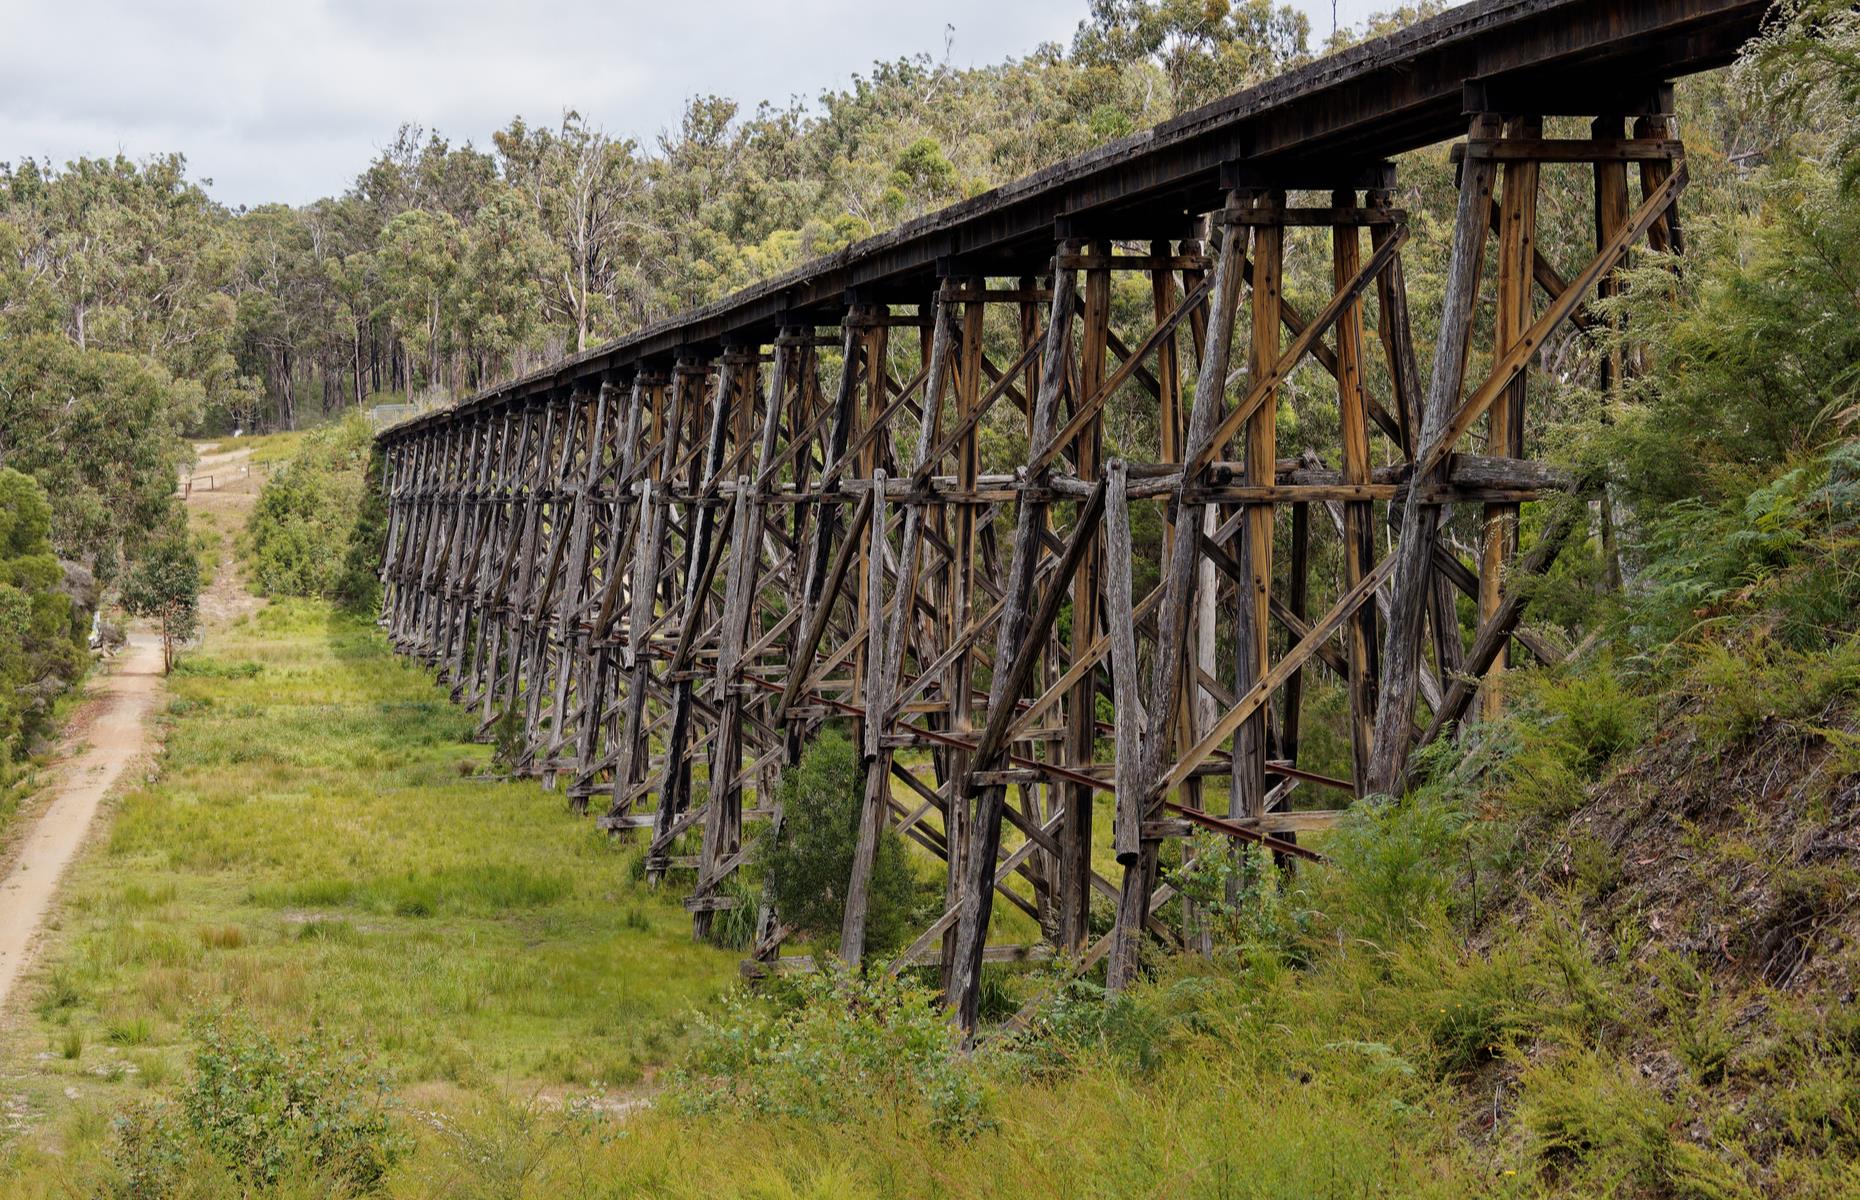 This creaky old railway bridge was built in 1916 from red ironbark and gray-box timber. It was constructed in a grueling project on tough terrain as part of an extension of the rail line between Bairnsdale to Orbost. Now heritage listed, it's the largest standing bridge of its kind in the state. It was used for over 60 years, but after being damaged by a bushfire in 1980 and subsequently falling into a poor condition, it saw its last train crossing in 1987.